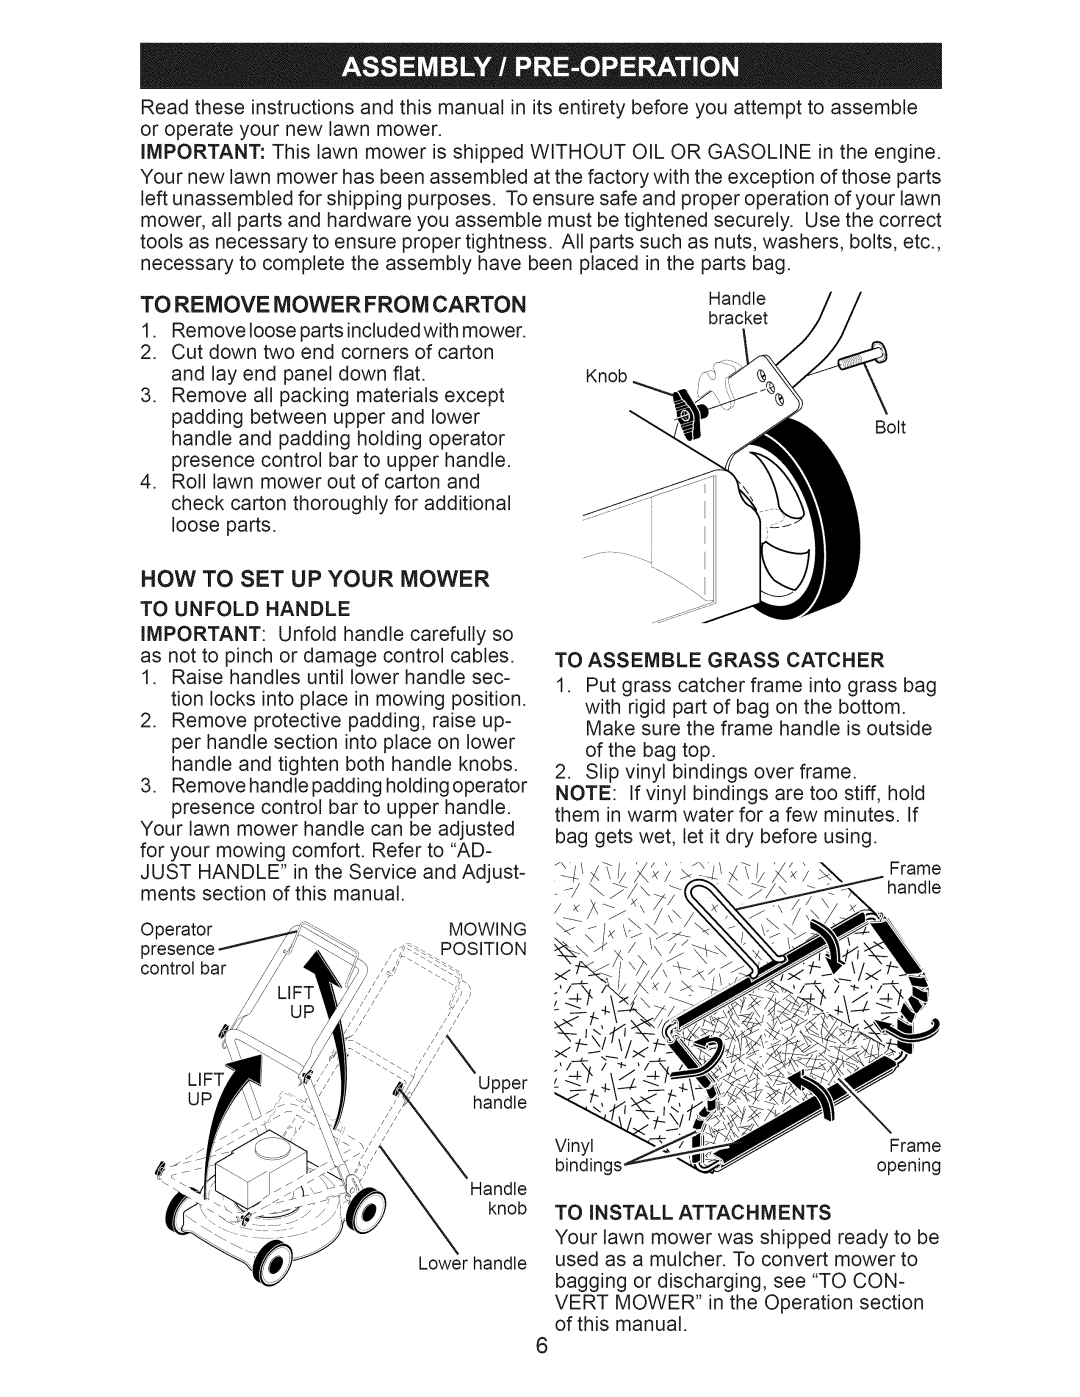 Craftsman 917.376232 manual To Remove Mower From Carton, Now To Set Up Your Mower 